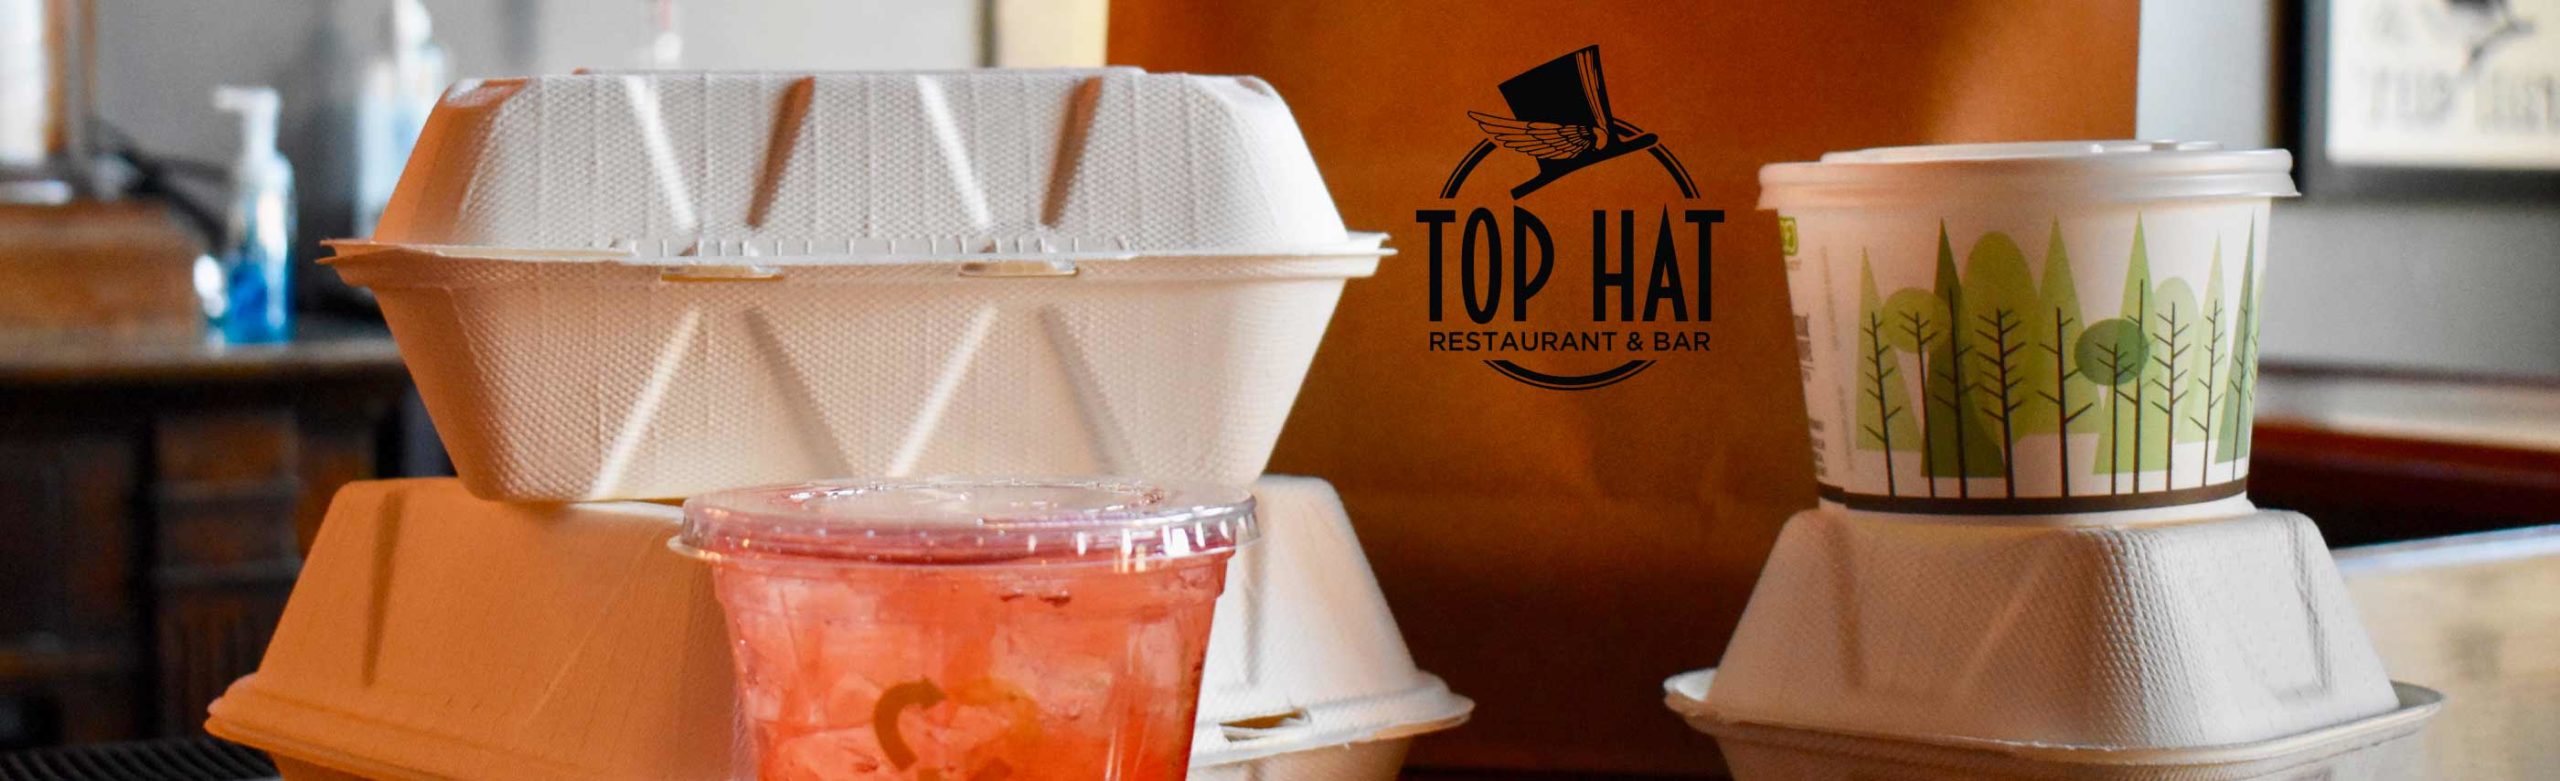 Top Hat Delivery & Take-Out